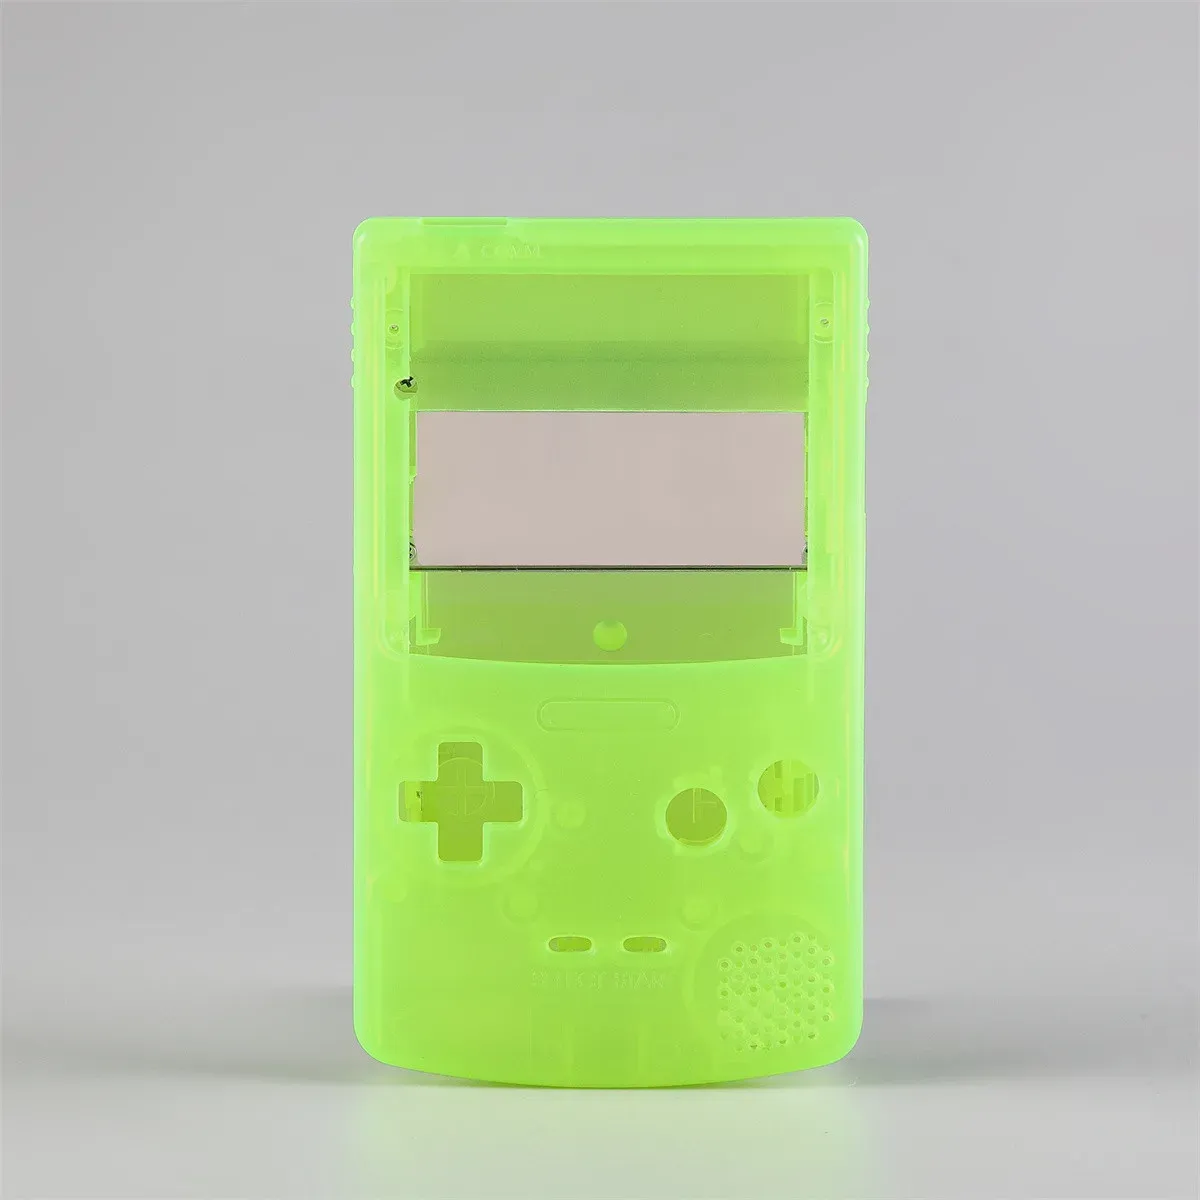 Accessories REPLACEMENT SHELL FOR GBC RETRO PIXEL 2.0 LAMINATED COUSTOM Housing FOR GAMEBOY ADVANCE COLOR